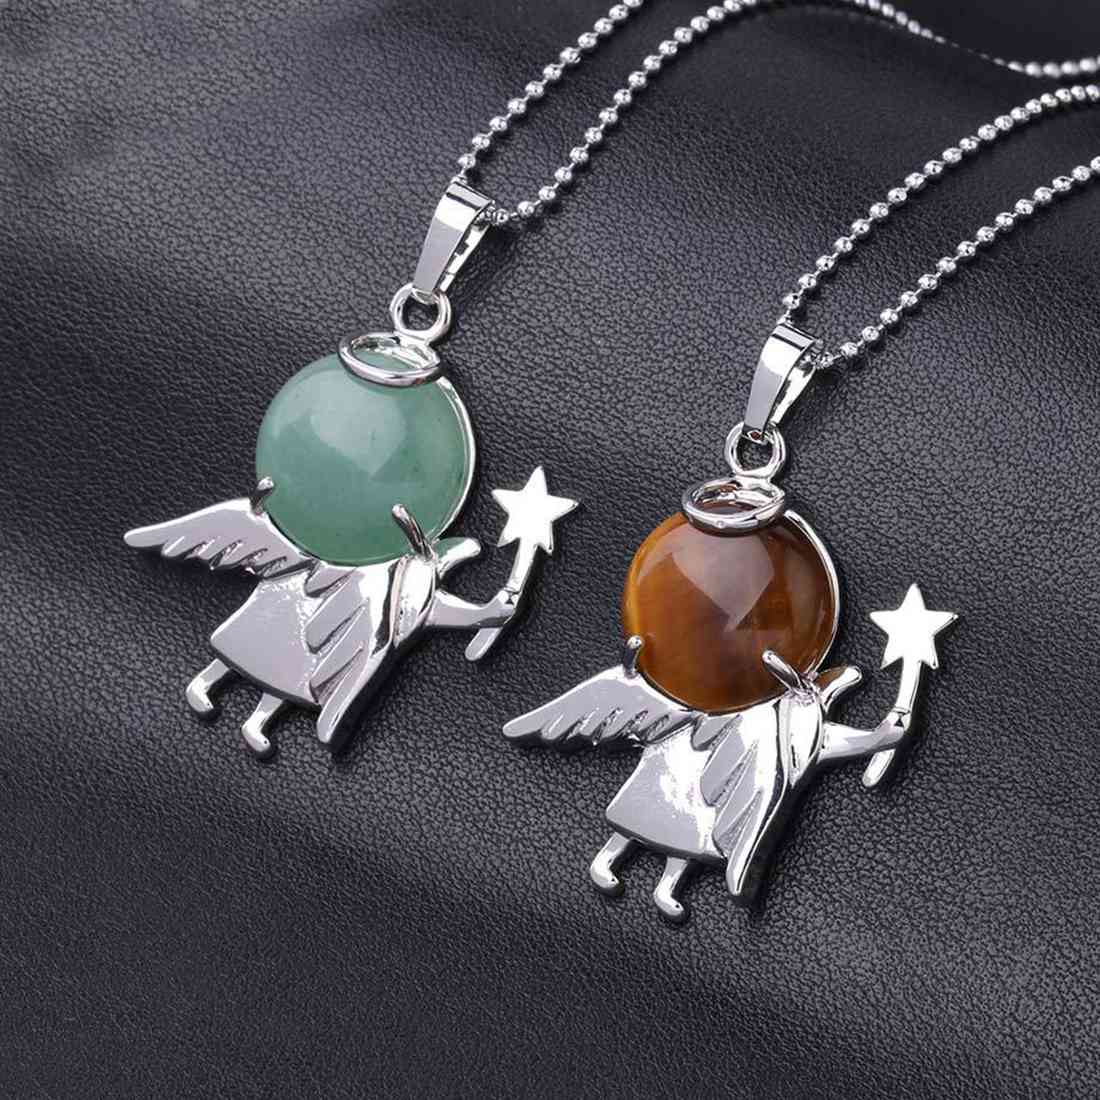 Fairy Rod Little Angel Pendant Necklace Natural Stone Teen Female Allegory Healing Guardian Gift 12pcs